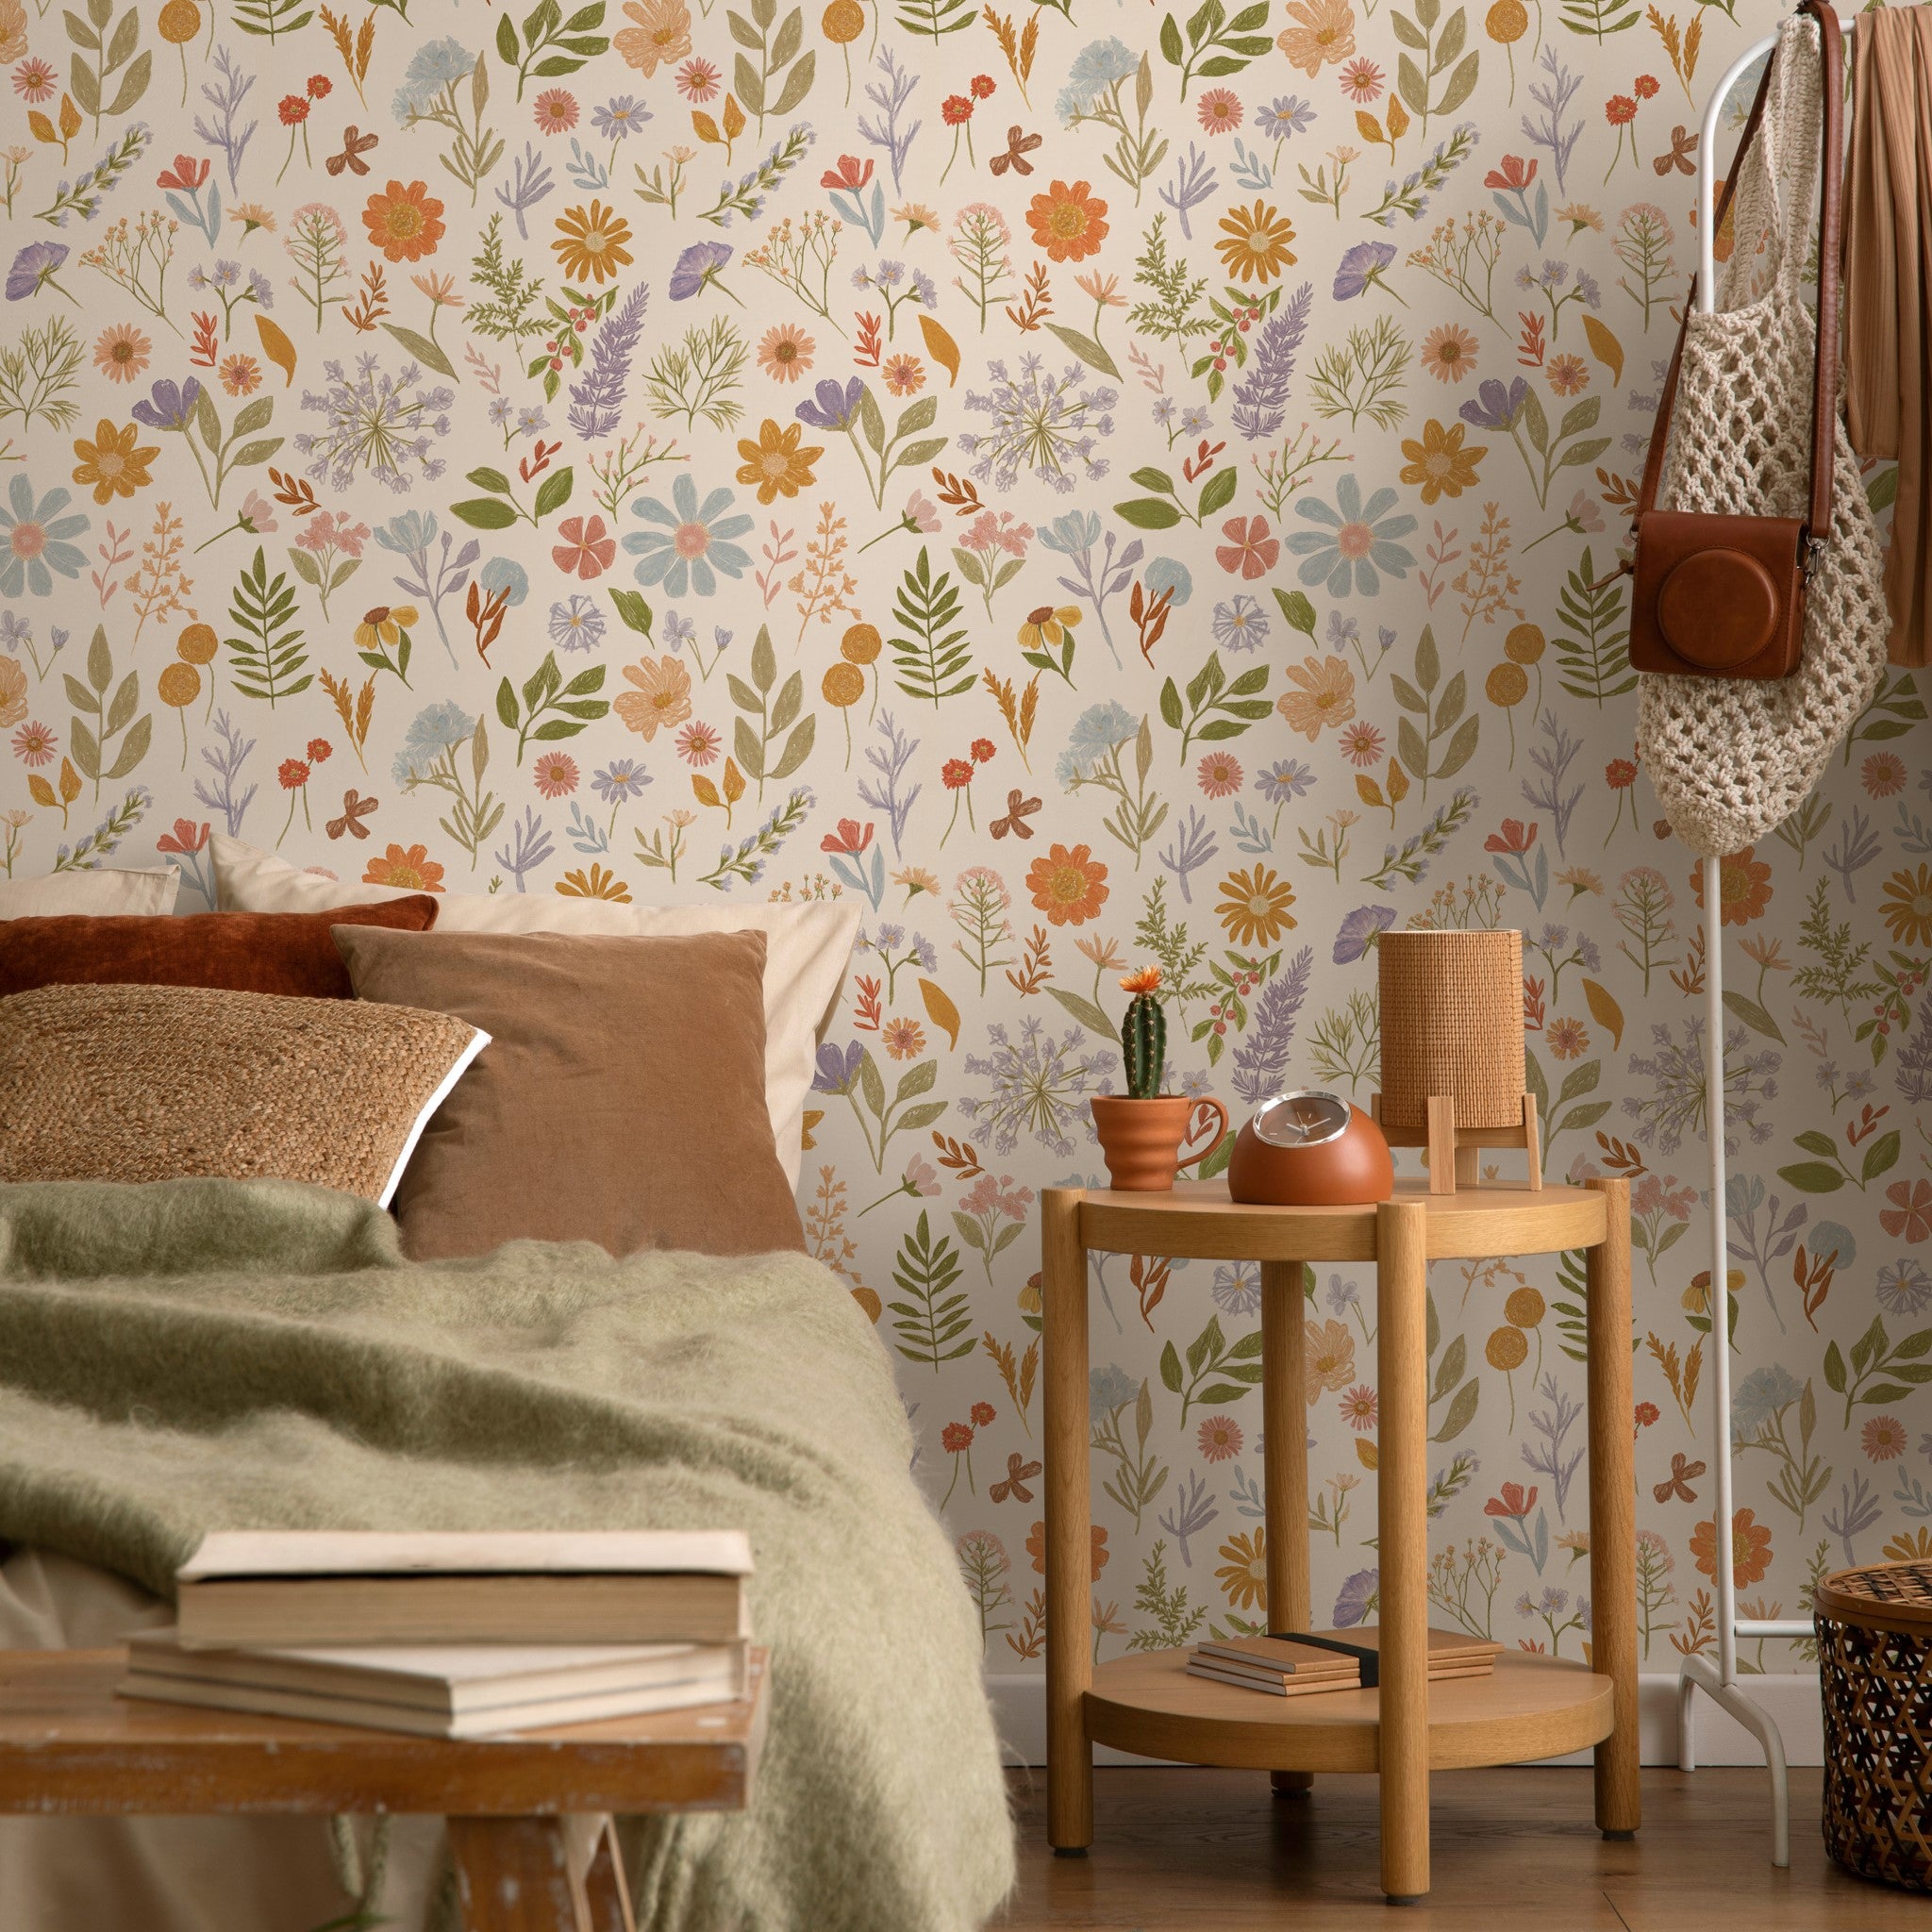 "Lily's Field Wallpaper from Wall Blush enhancing a cozy bedroom interior, with a focus on the vibrant floral design."